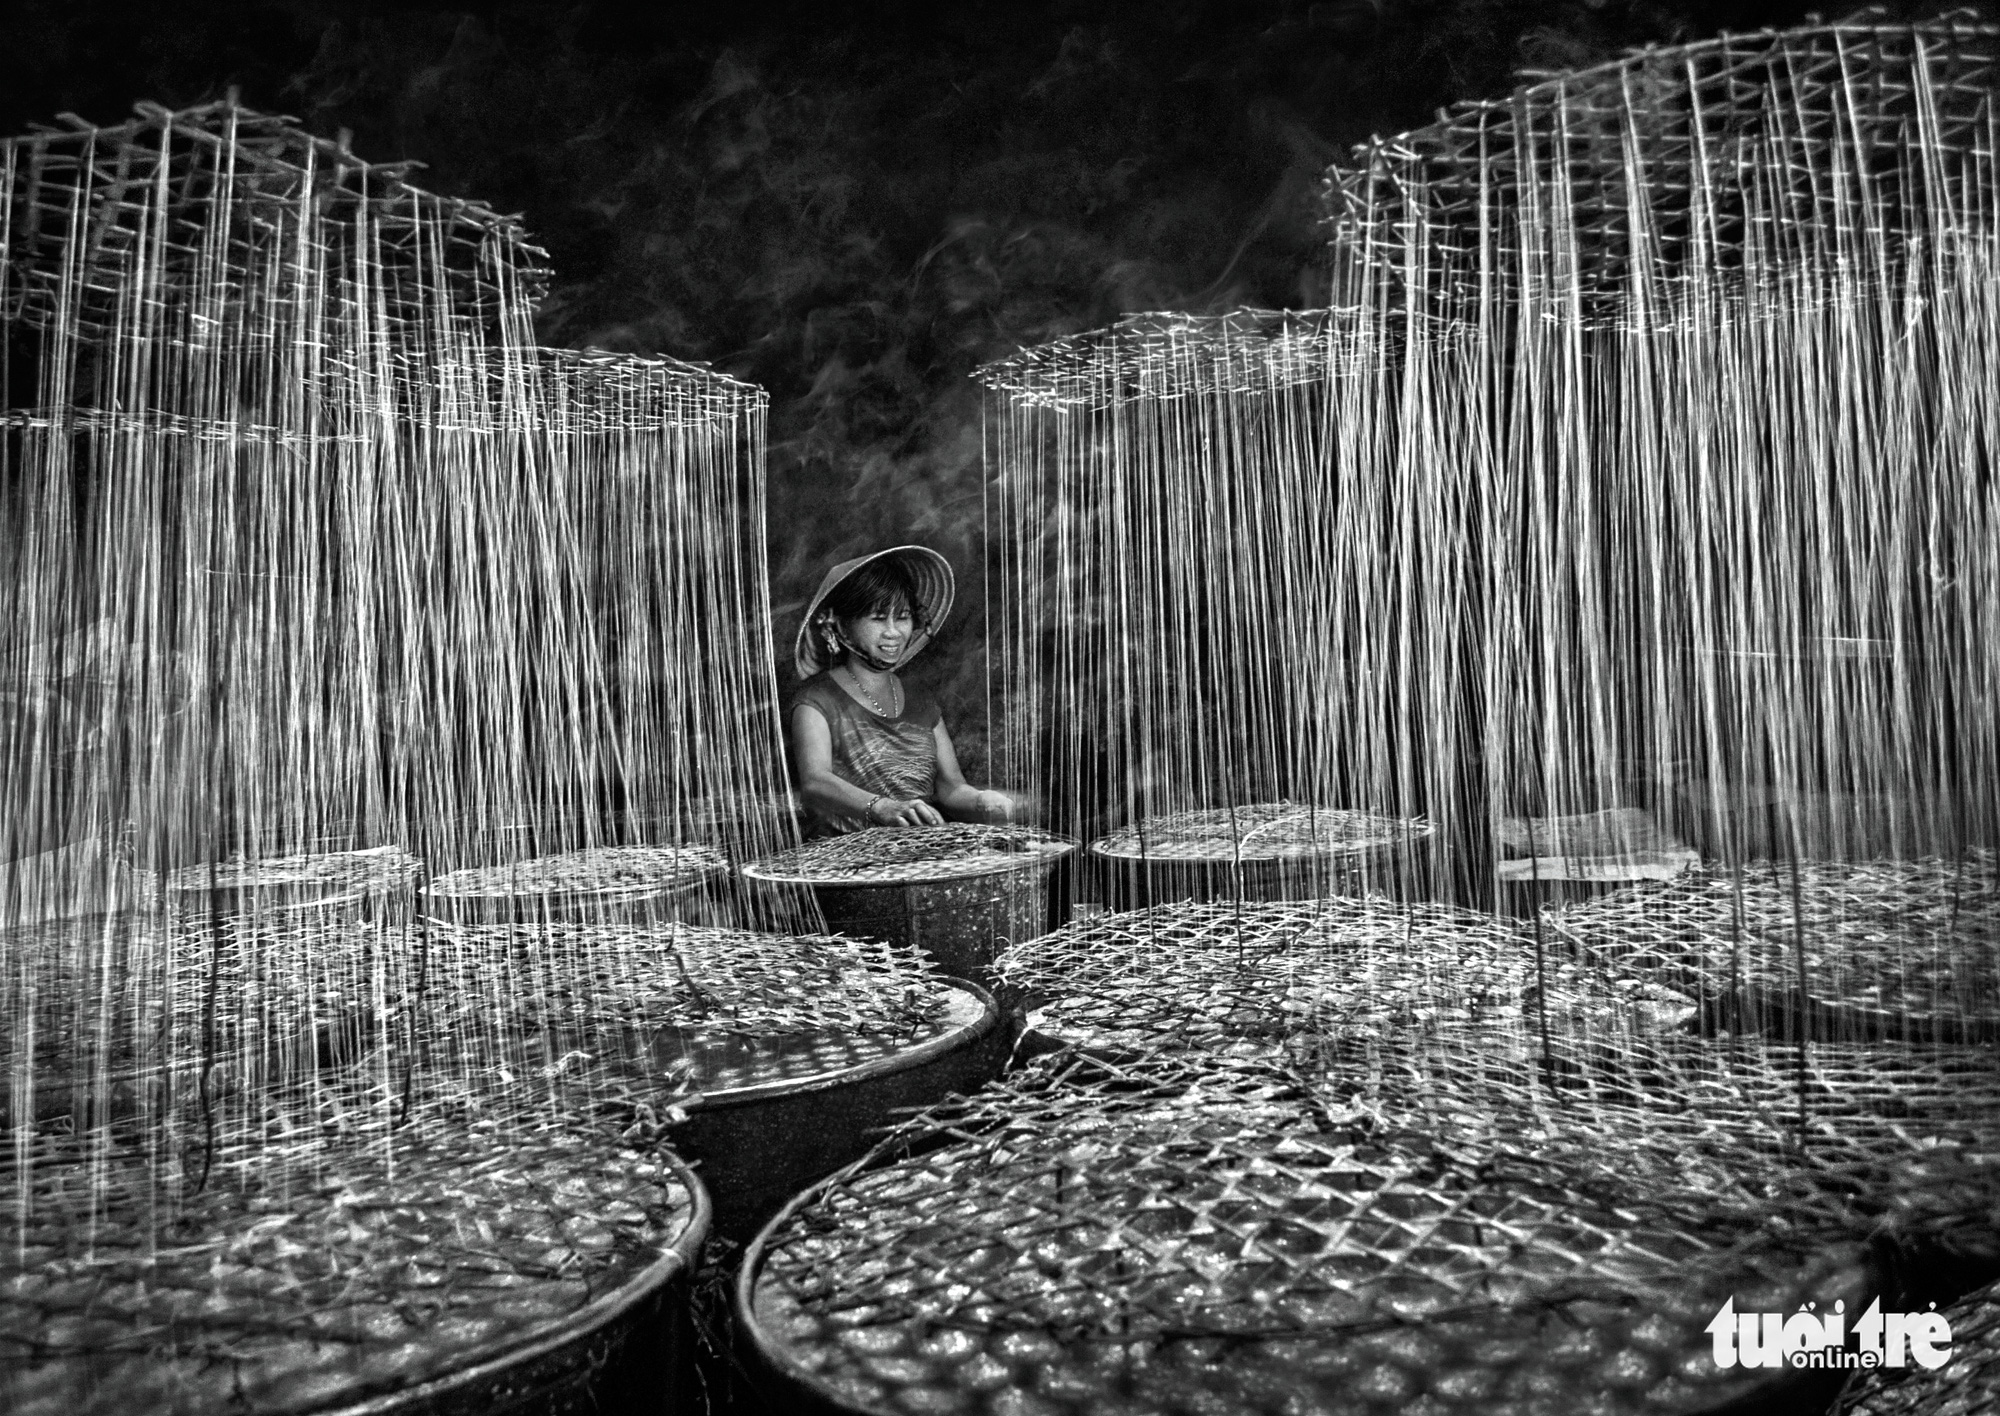 A woman makes rock sugar at a facility in Quang Ngai Province, Vietnam. Photo: Dao Tien Dat